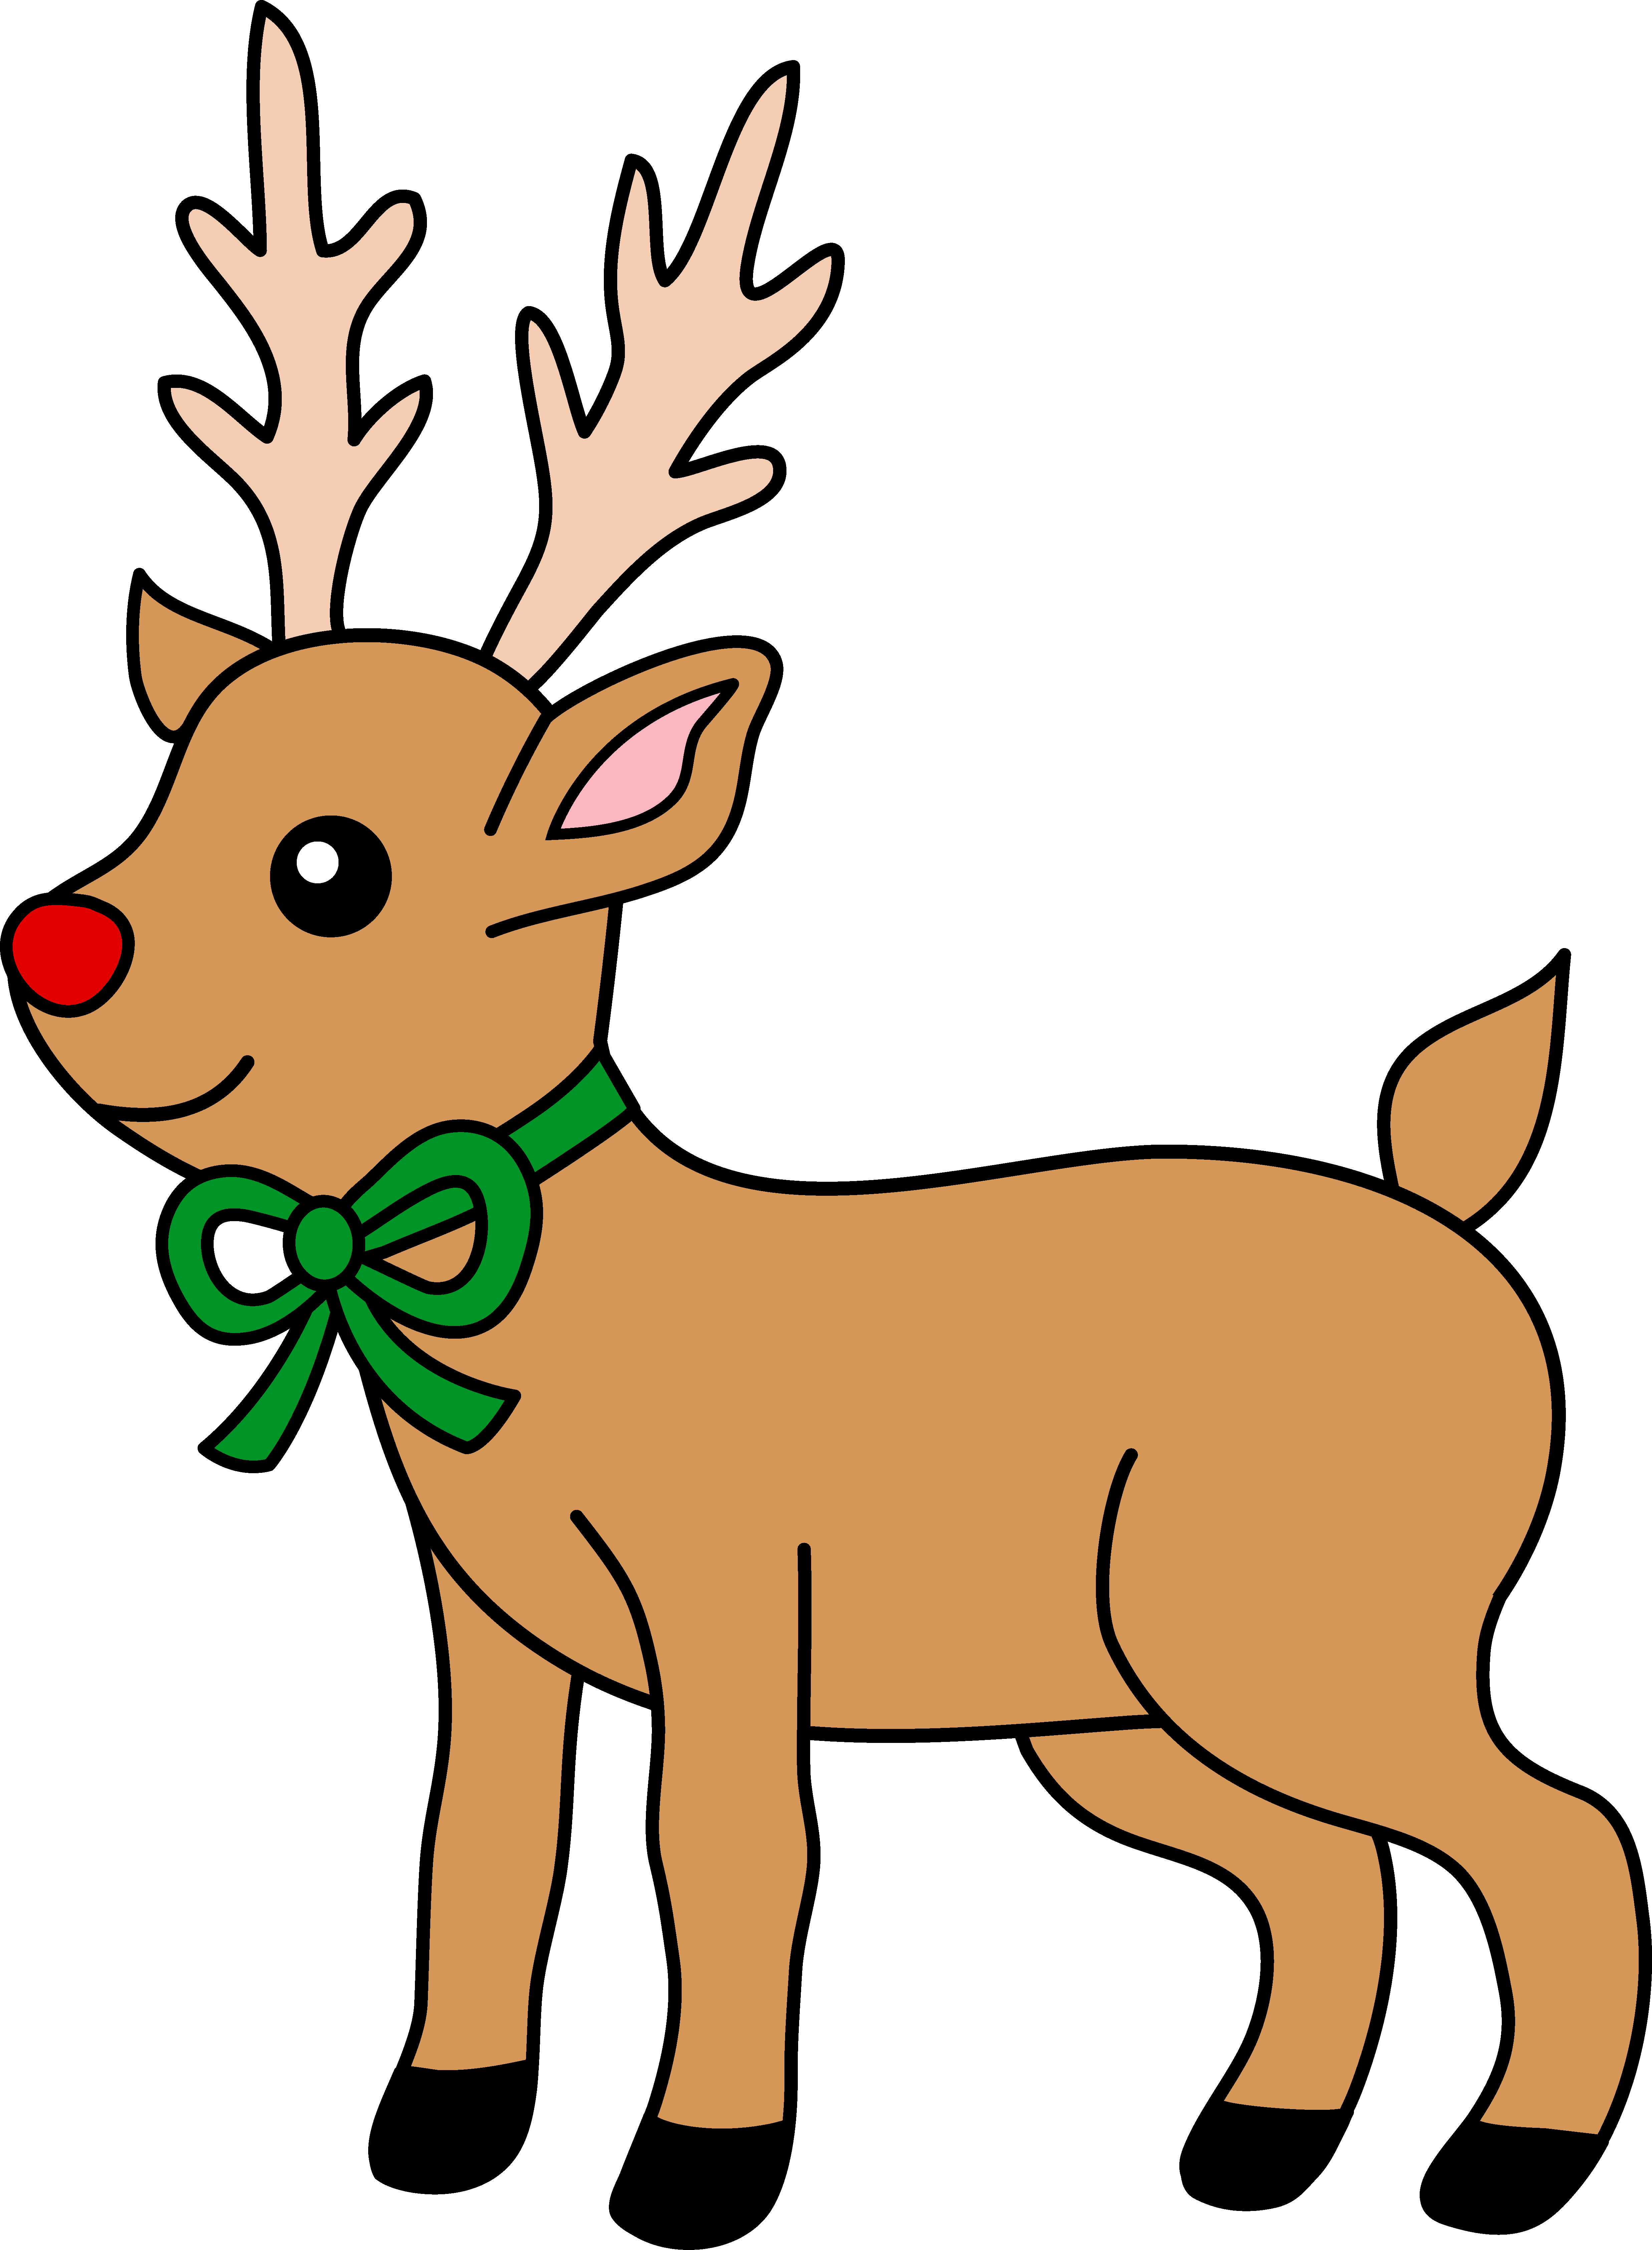 Cute Red-Nosed Reindeer Clipart - Free Clip Art